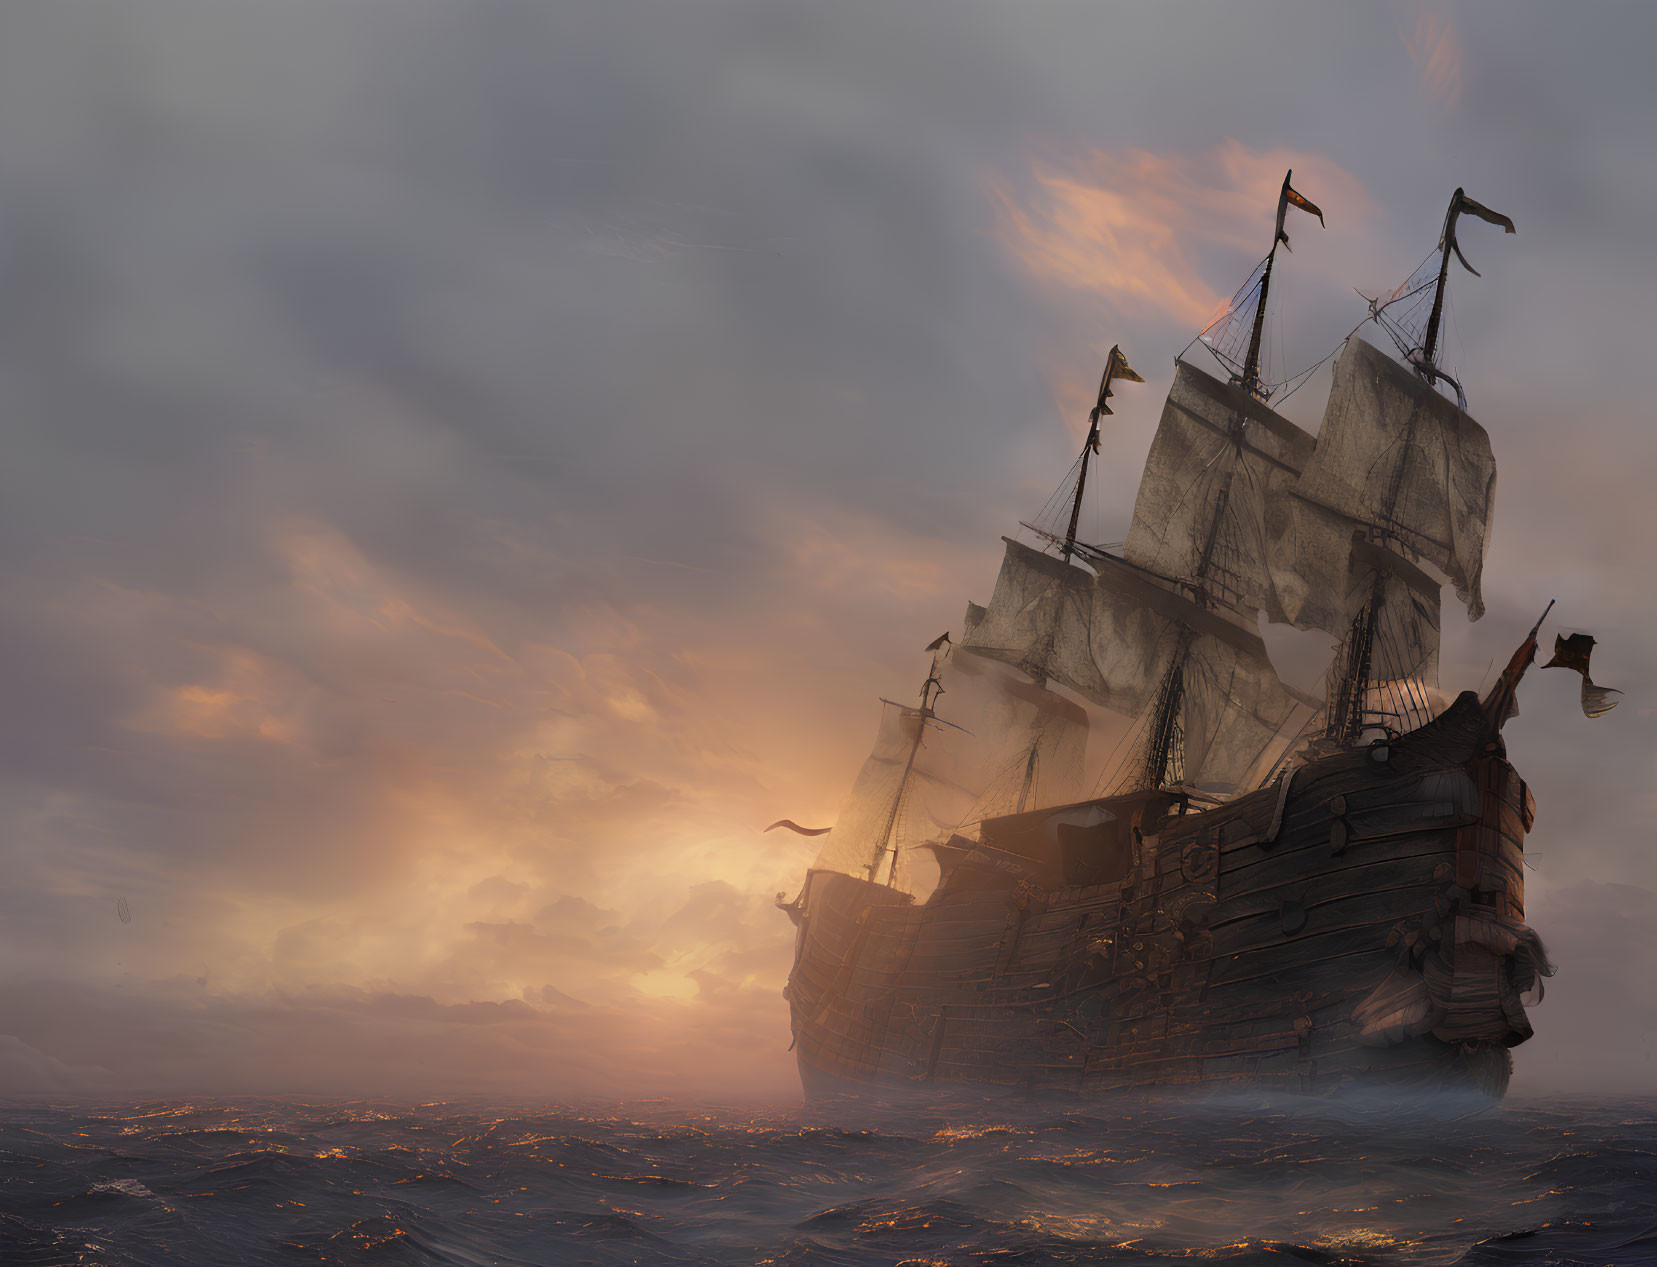 Vintage sailing ship with tattered sails in stormy seas at sunset.